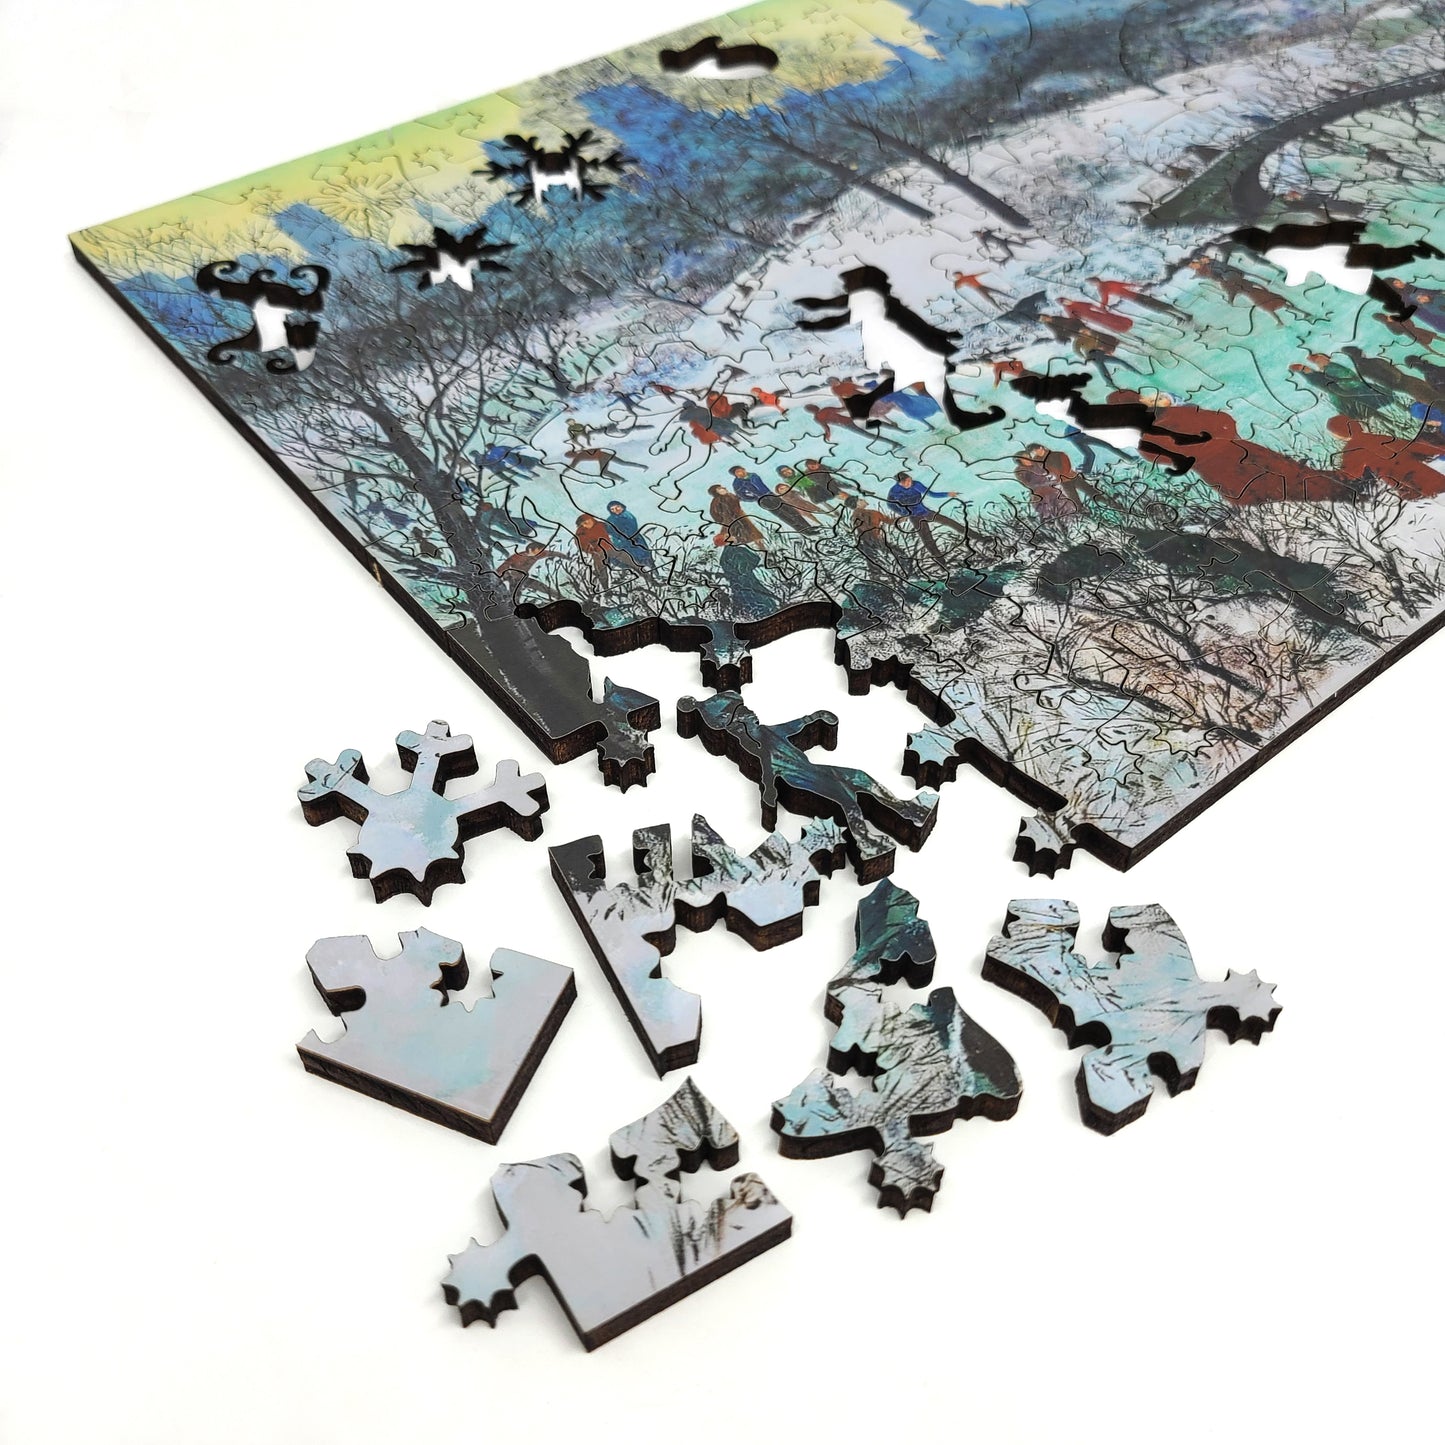 Large Format Wooden Jigsaw Puzzle with Uniquely Shaped Pieces for Seniors and Adults - 180 Pieces - Skating in Central Park